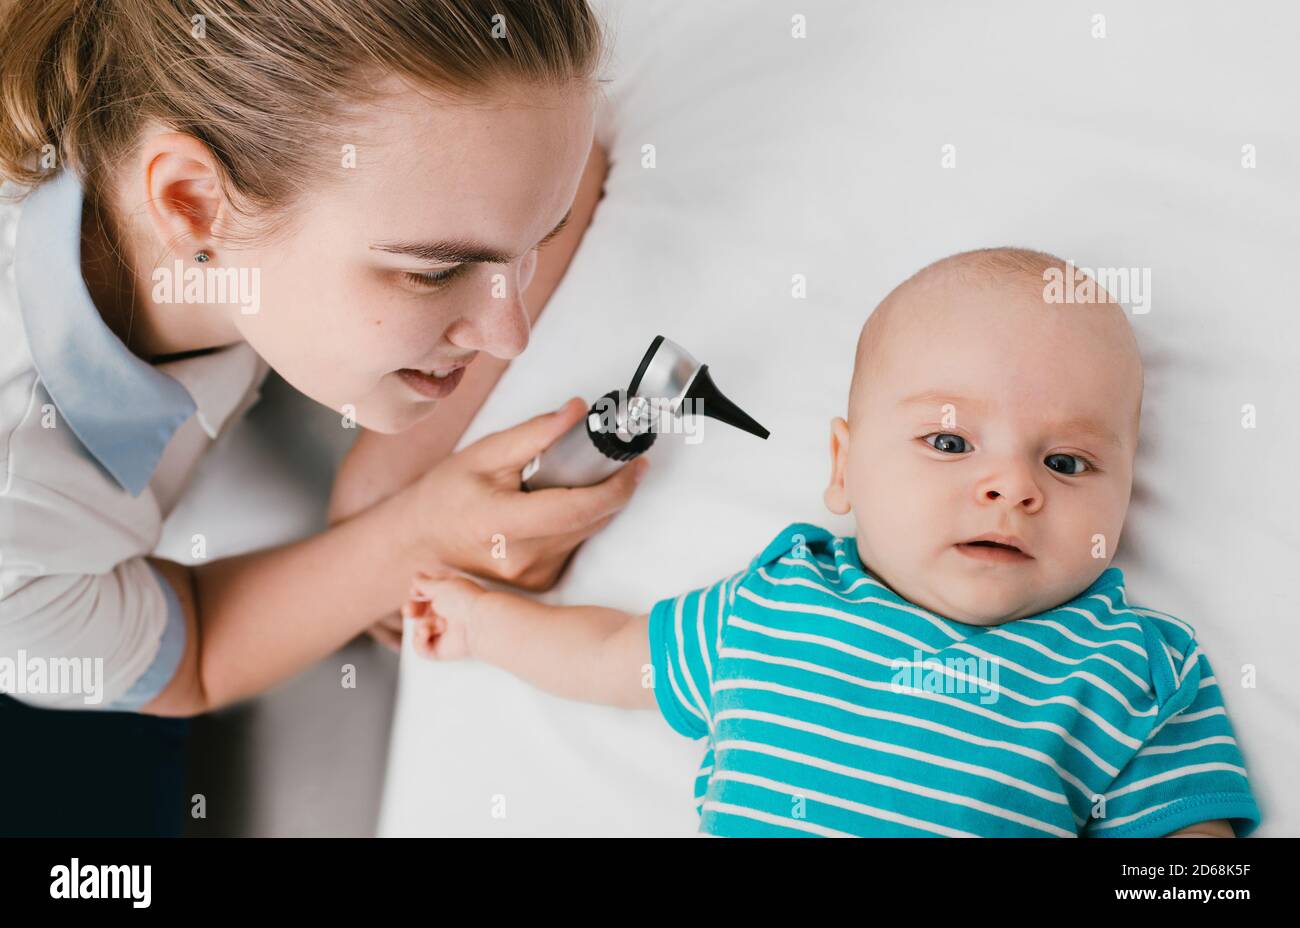 Smiling pediatrician doing ear exam with an otoscope to a baby at the hospital. doctor examines infant baby 3-month-old Stock Photo